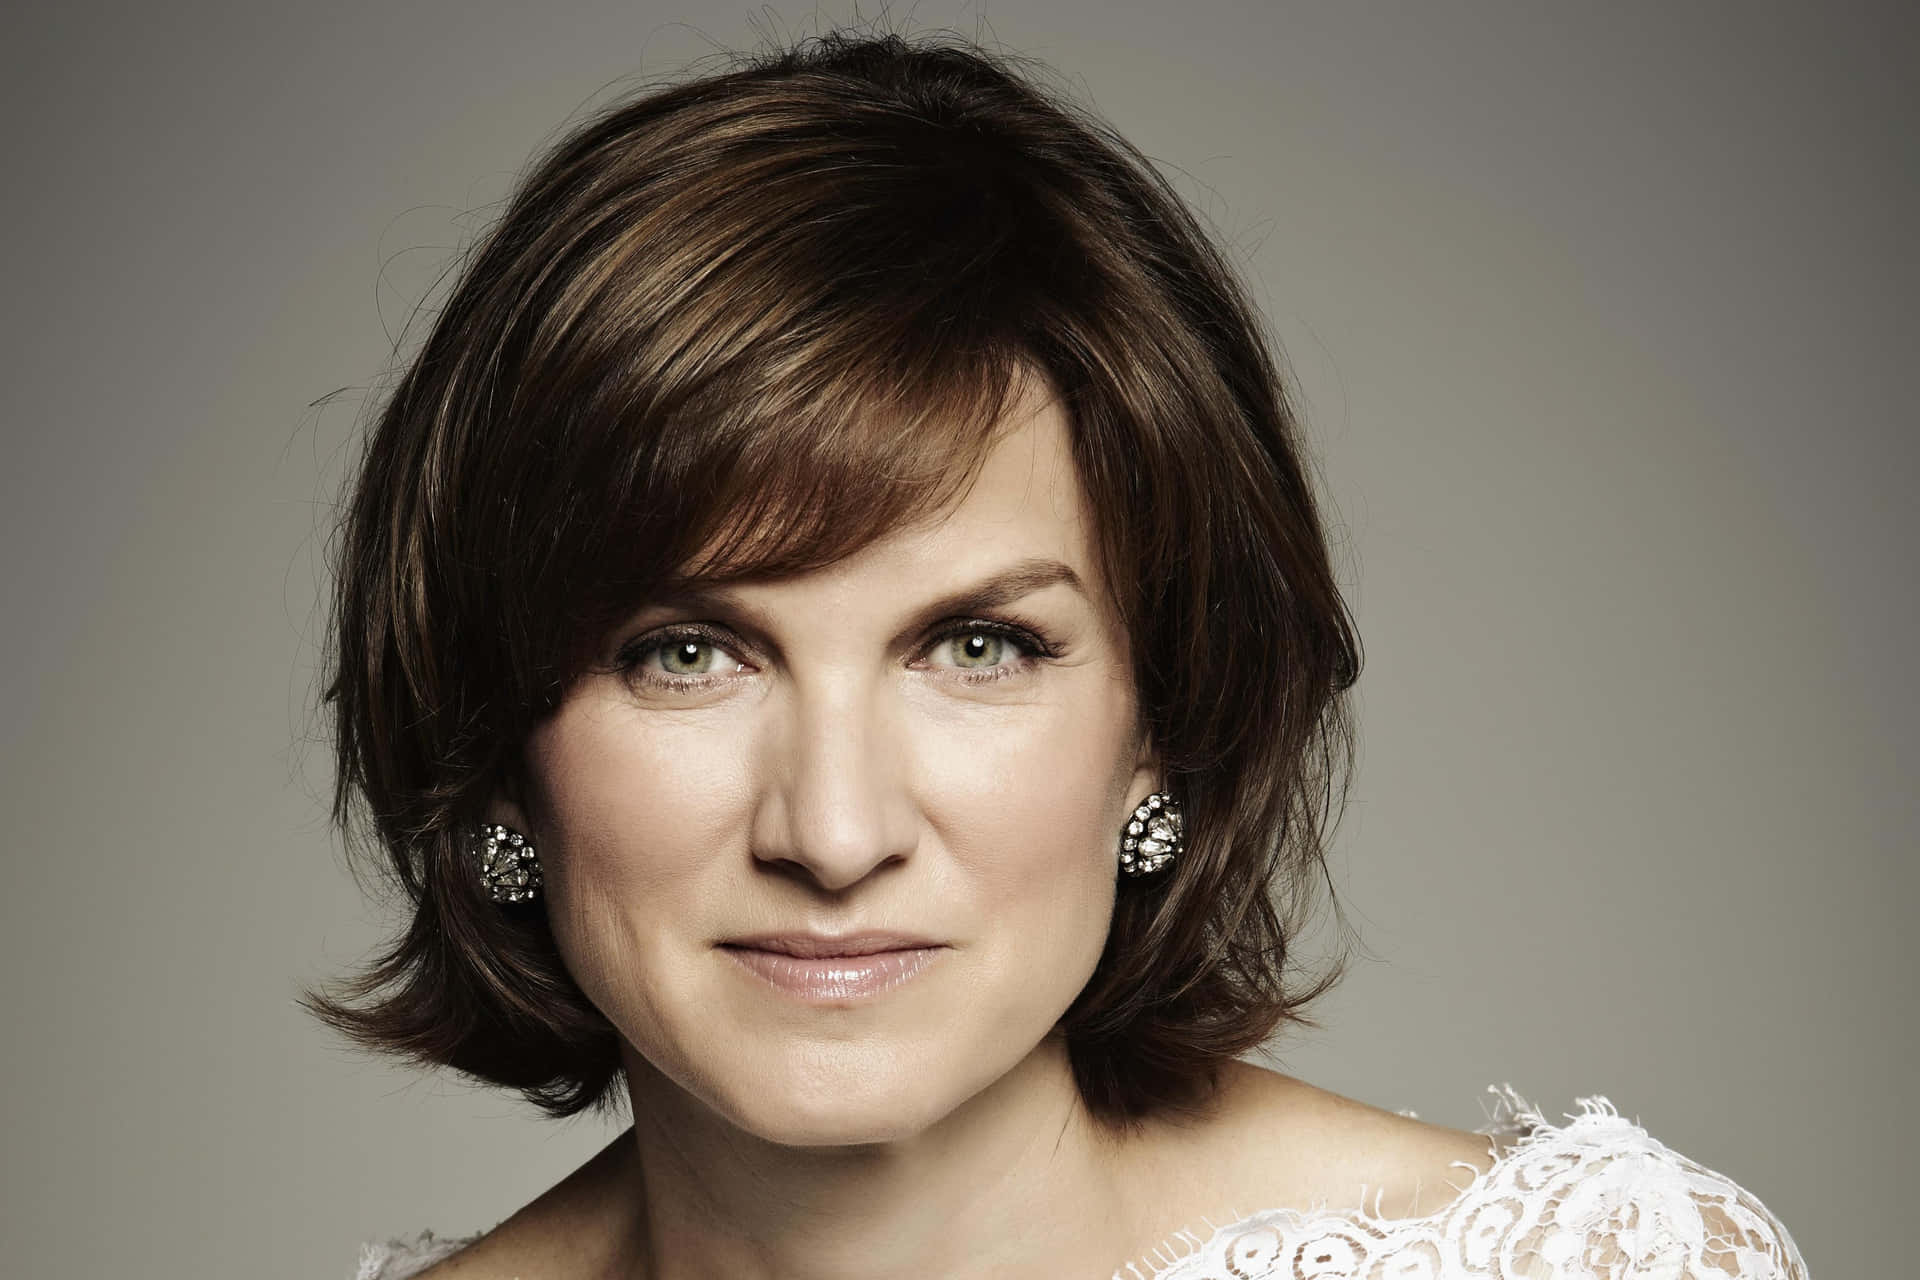 Fiona Bruce in a thoughtful pose during an interview. Wallpaper